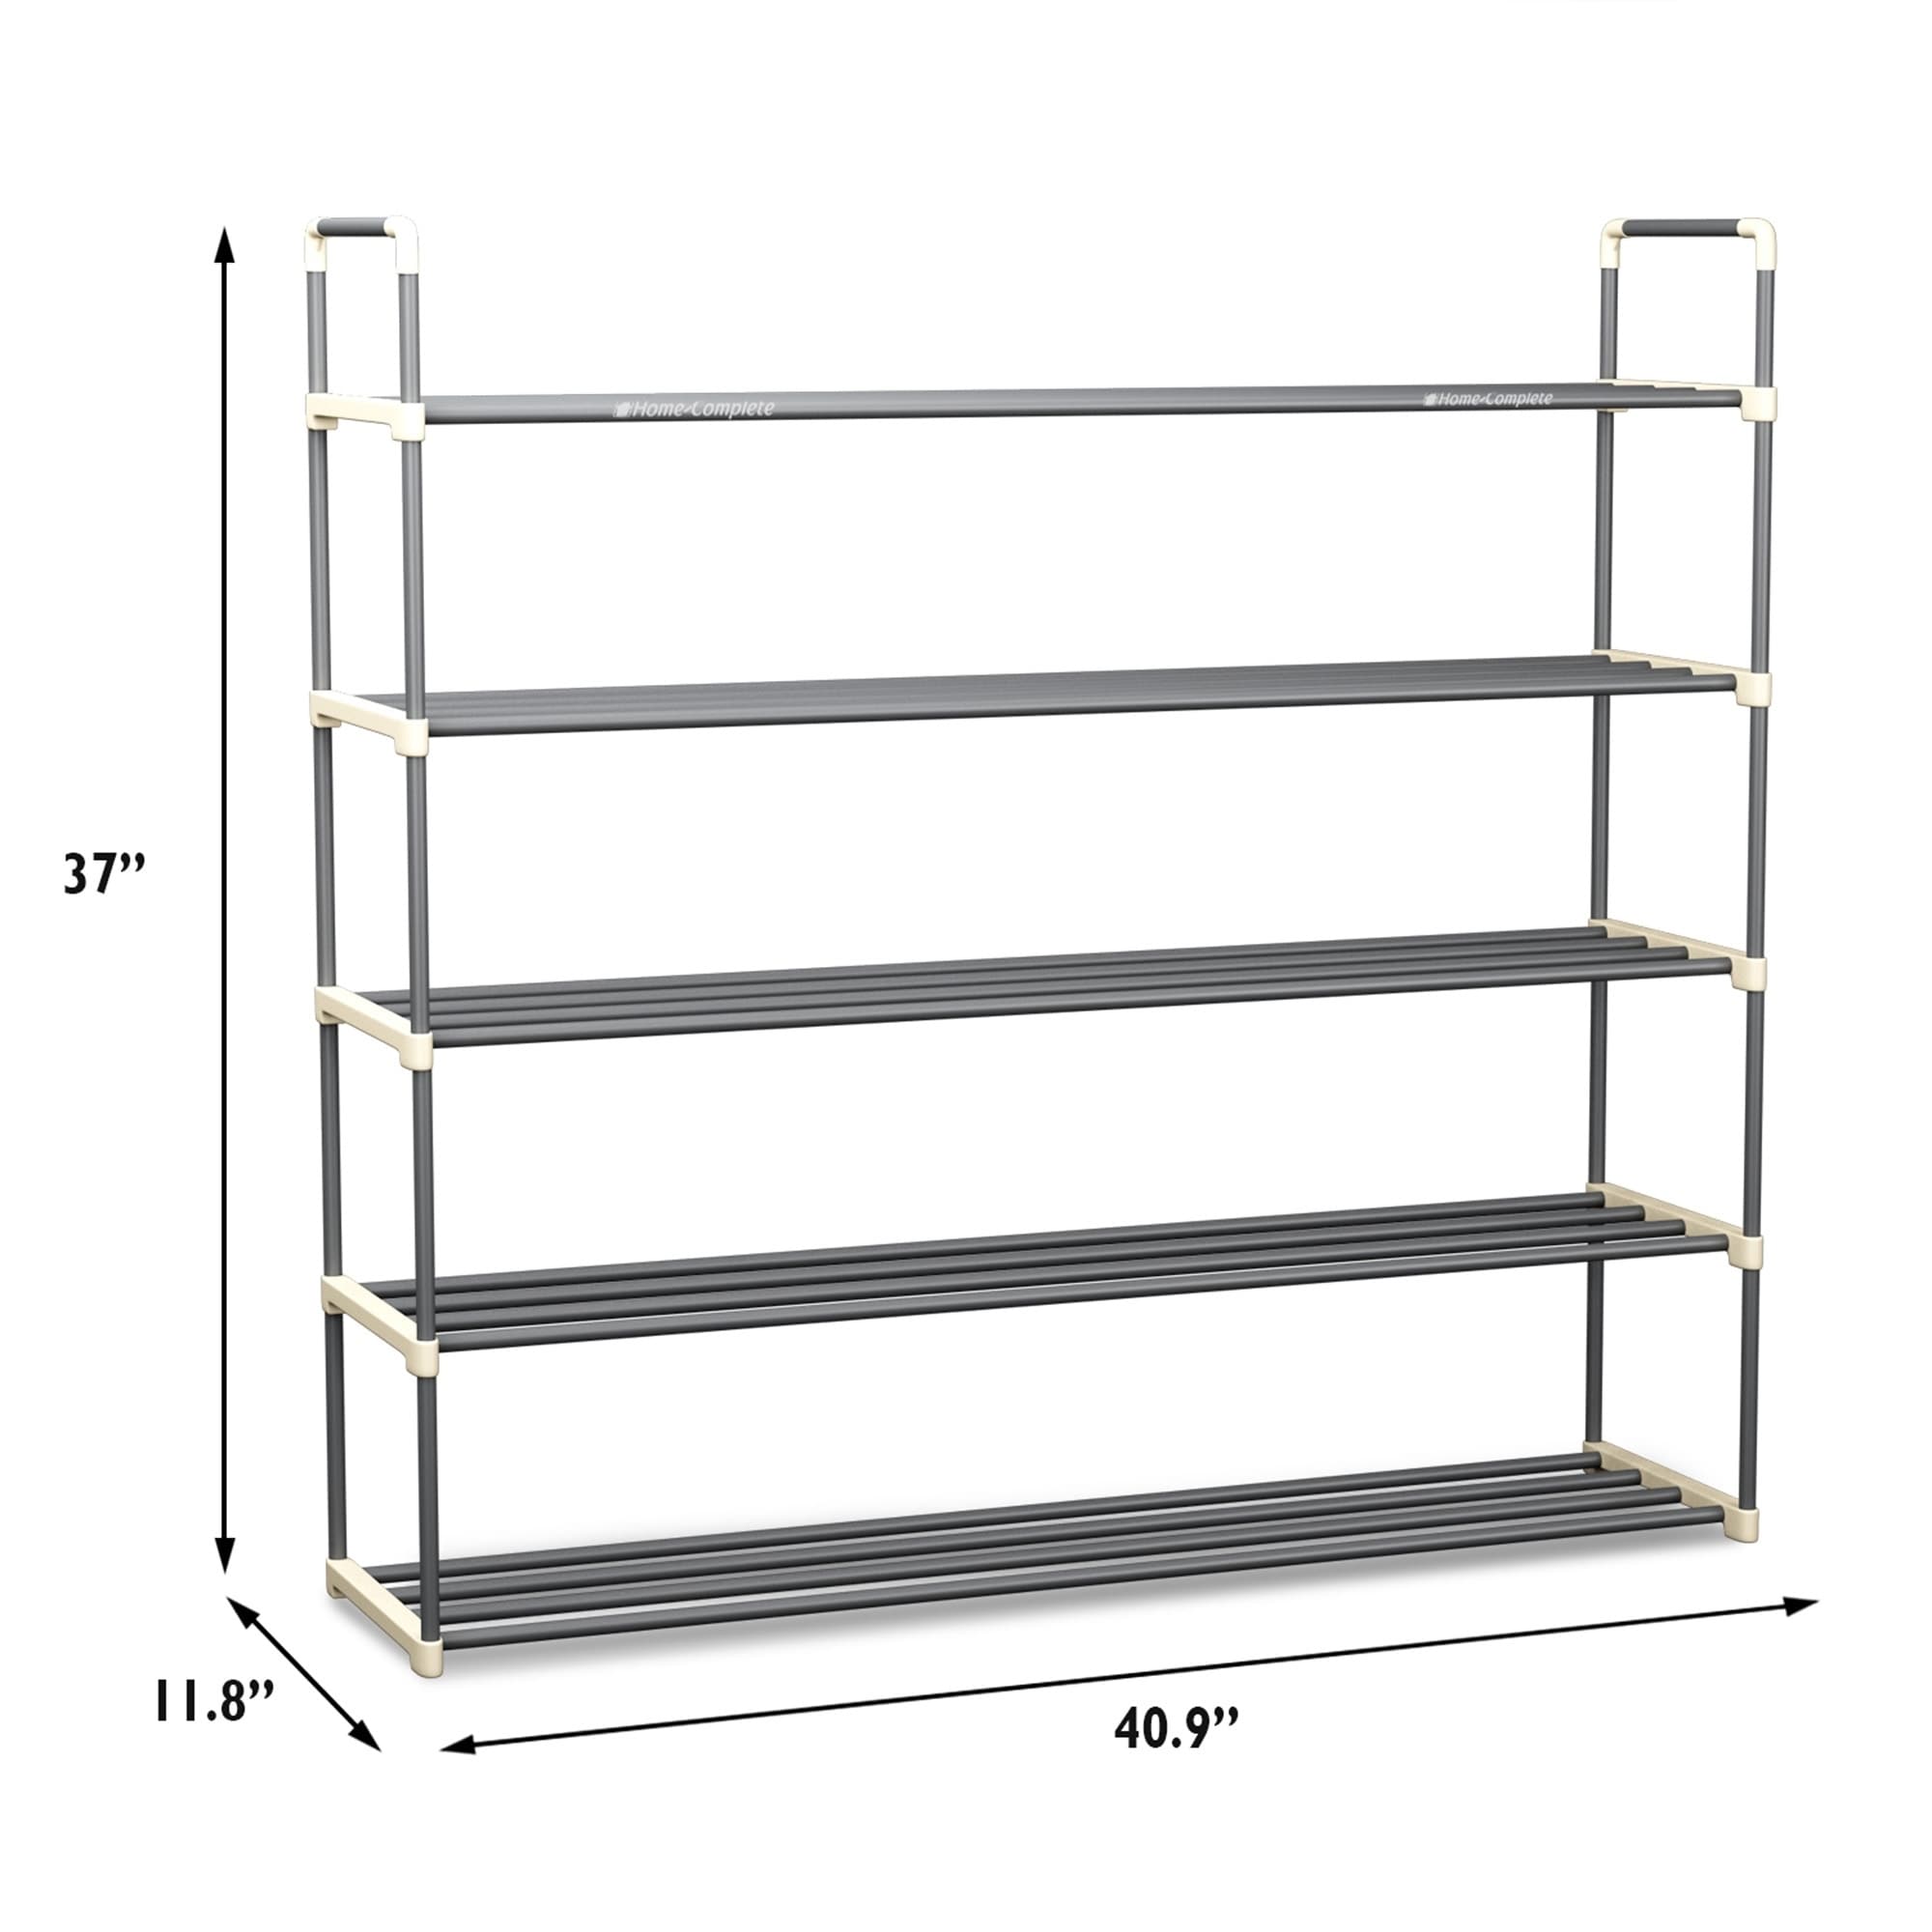 https://ak1.ostkcdn.com/images/products/24071883/Shoe-Rack-with-5-Shelves-Five-Tiers-for-30-Pairs-Home-Complete-3220ec25-07c0-482a-be5a-434cd26160b9.jpg